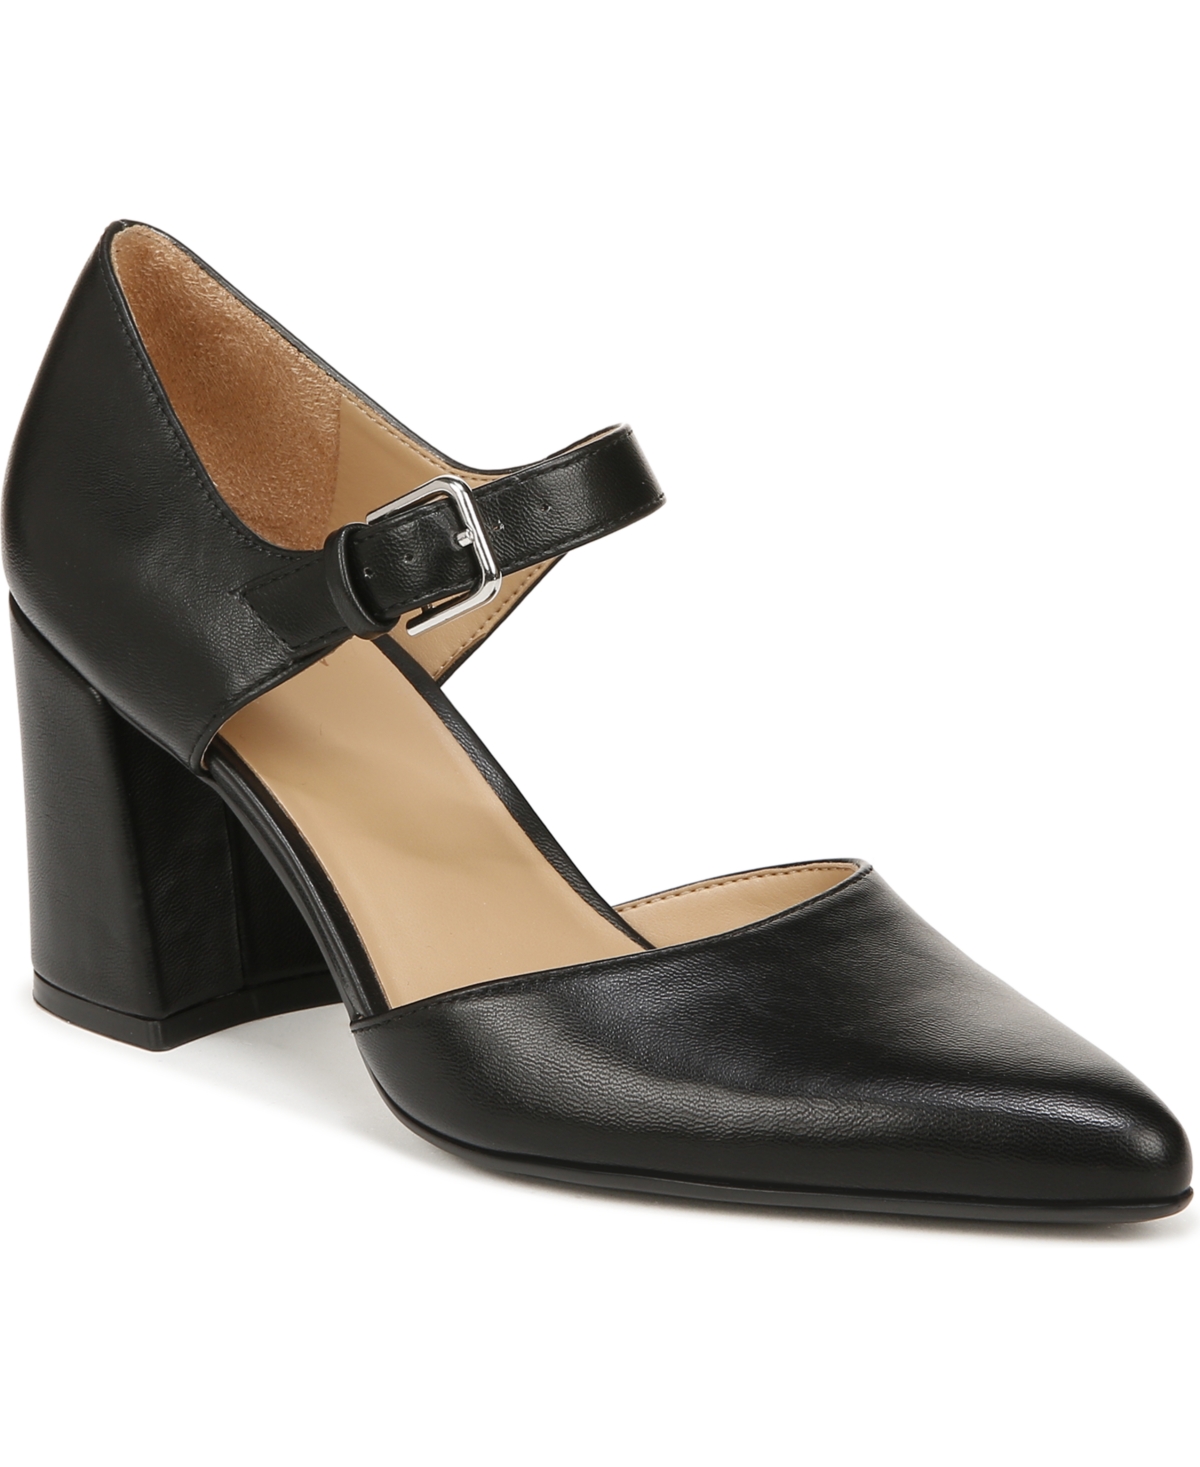 Naturalizer Pixie Mary Jane Pumps In Black Faux Leather